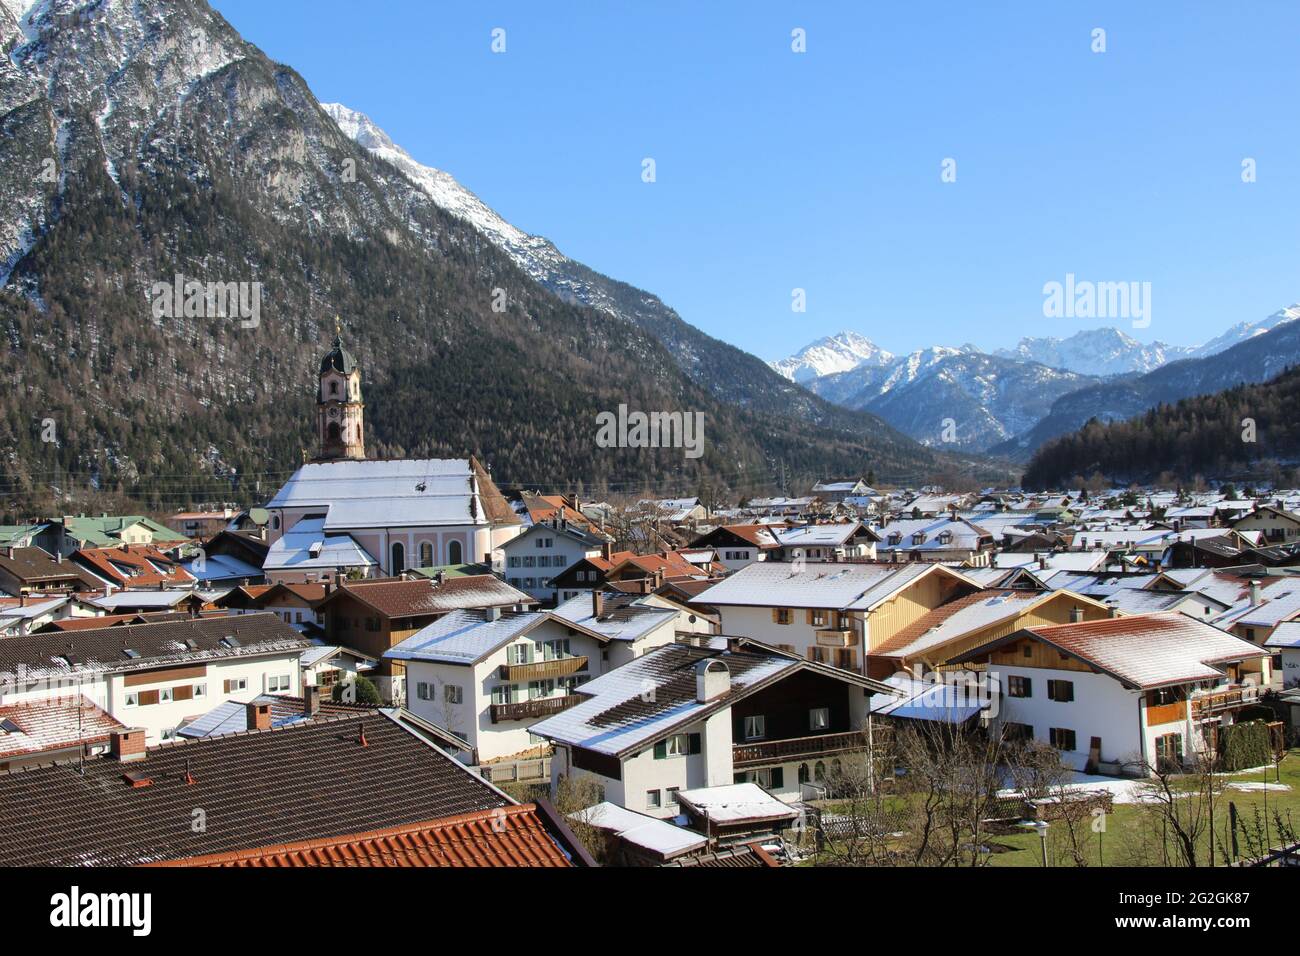 Spring walk with a fantastic view of Mittenwald and the parish church St. Peter & Paul, town overview, Europe, Germany, Bavaria, Upper Bavaria, Werdenfels, winter, Karwendel Mountains, church Stock Photo